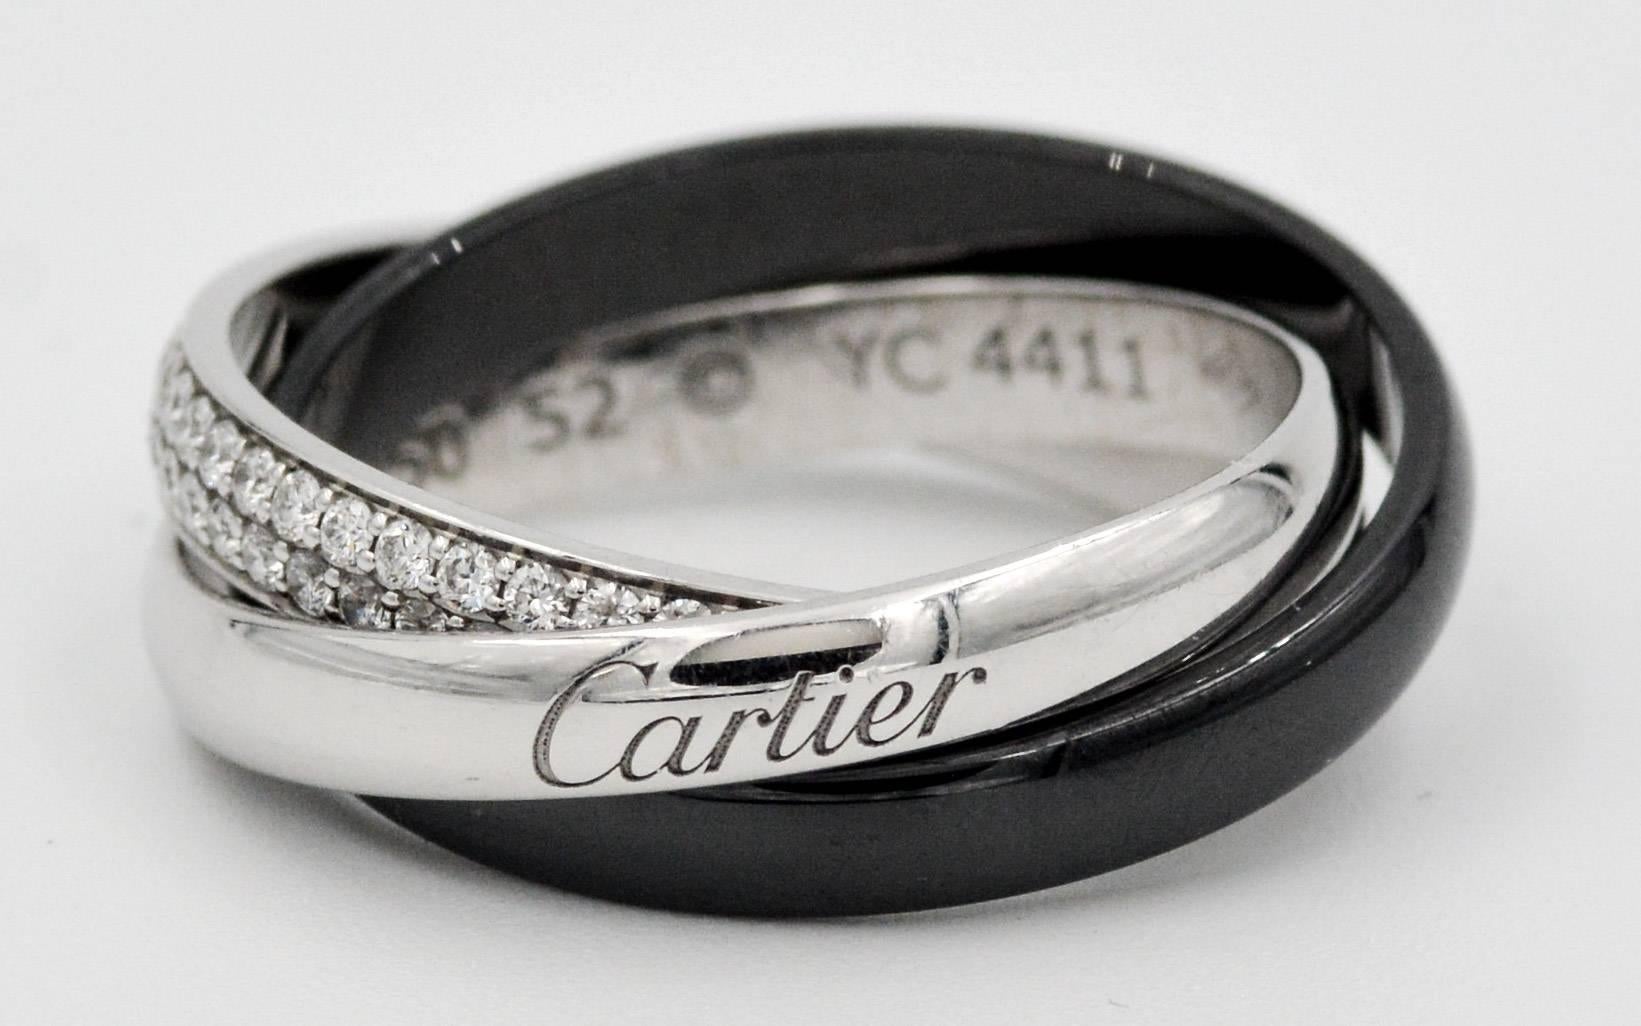 This classic Cartier Trinity rolling ring is made of of three contrasting domed bands.  One of the Cartier bands is a black ceramic domed band, another is 18kt white gold engraved "Cartier", and the other is 18kt white gold pave set with